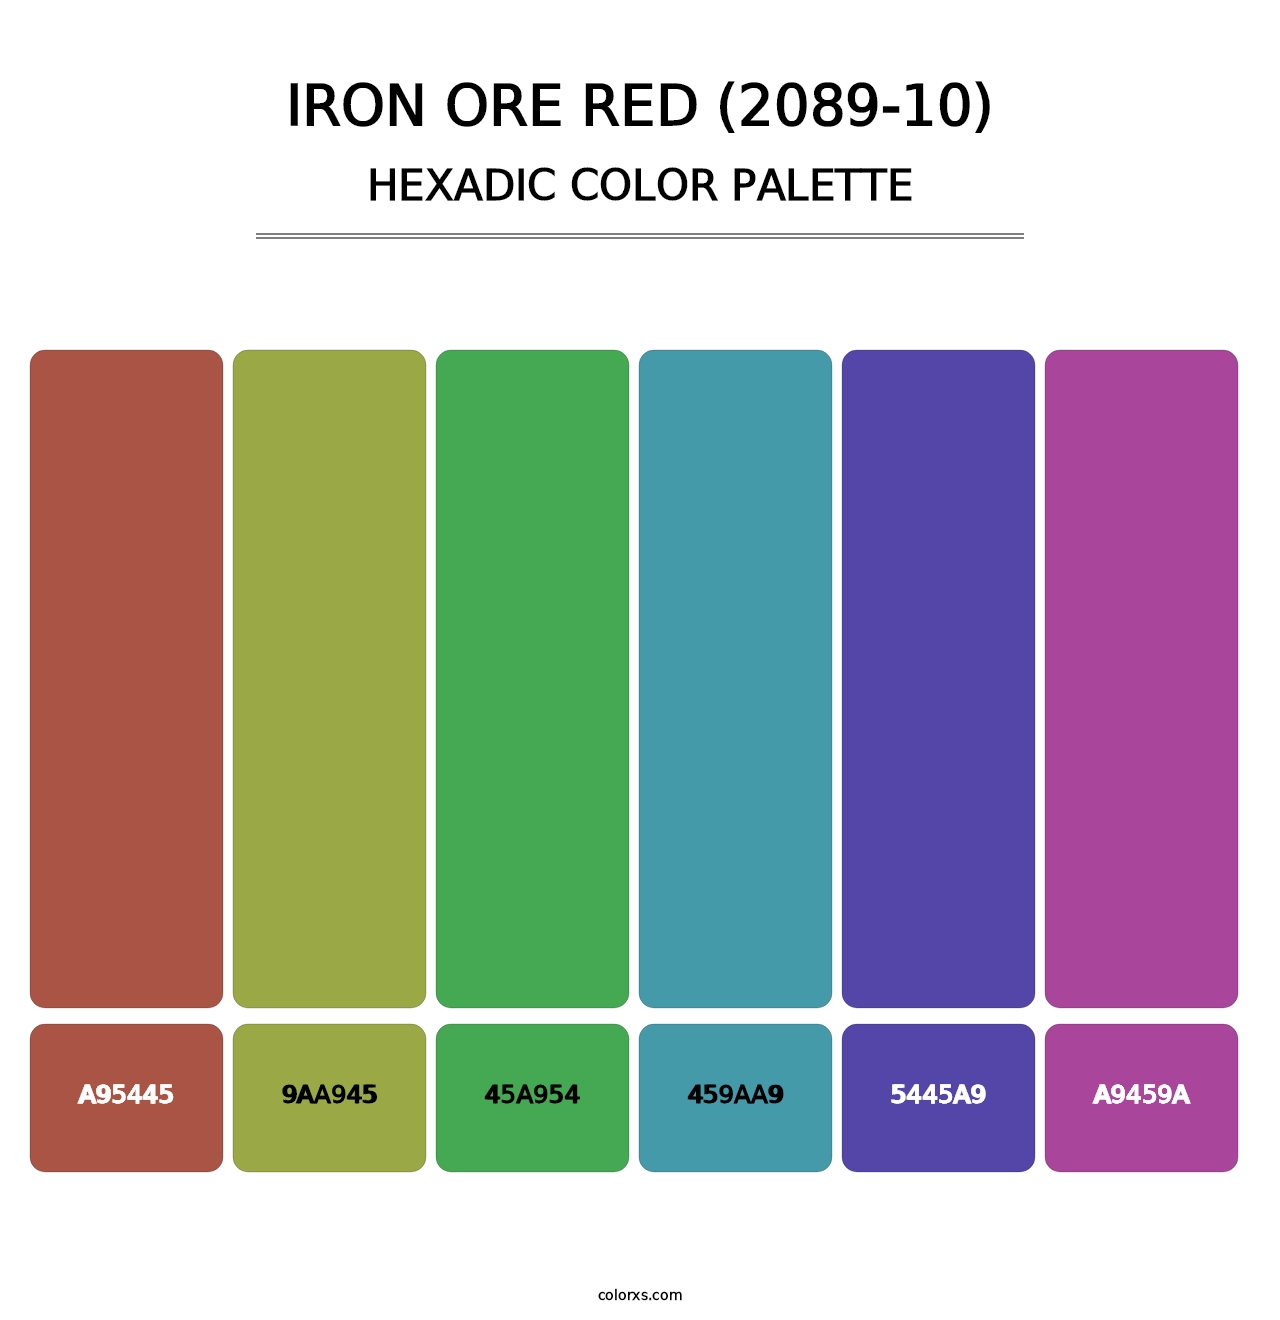 Iron Ore Red (2089-10) - Hexadic Color Palette